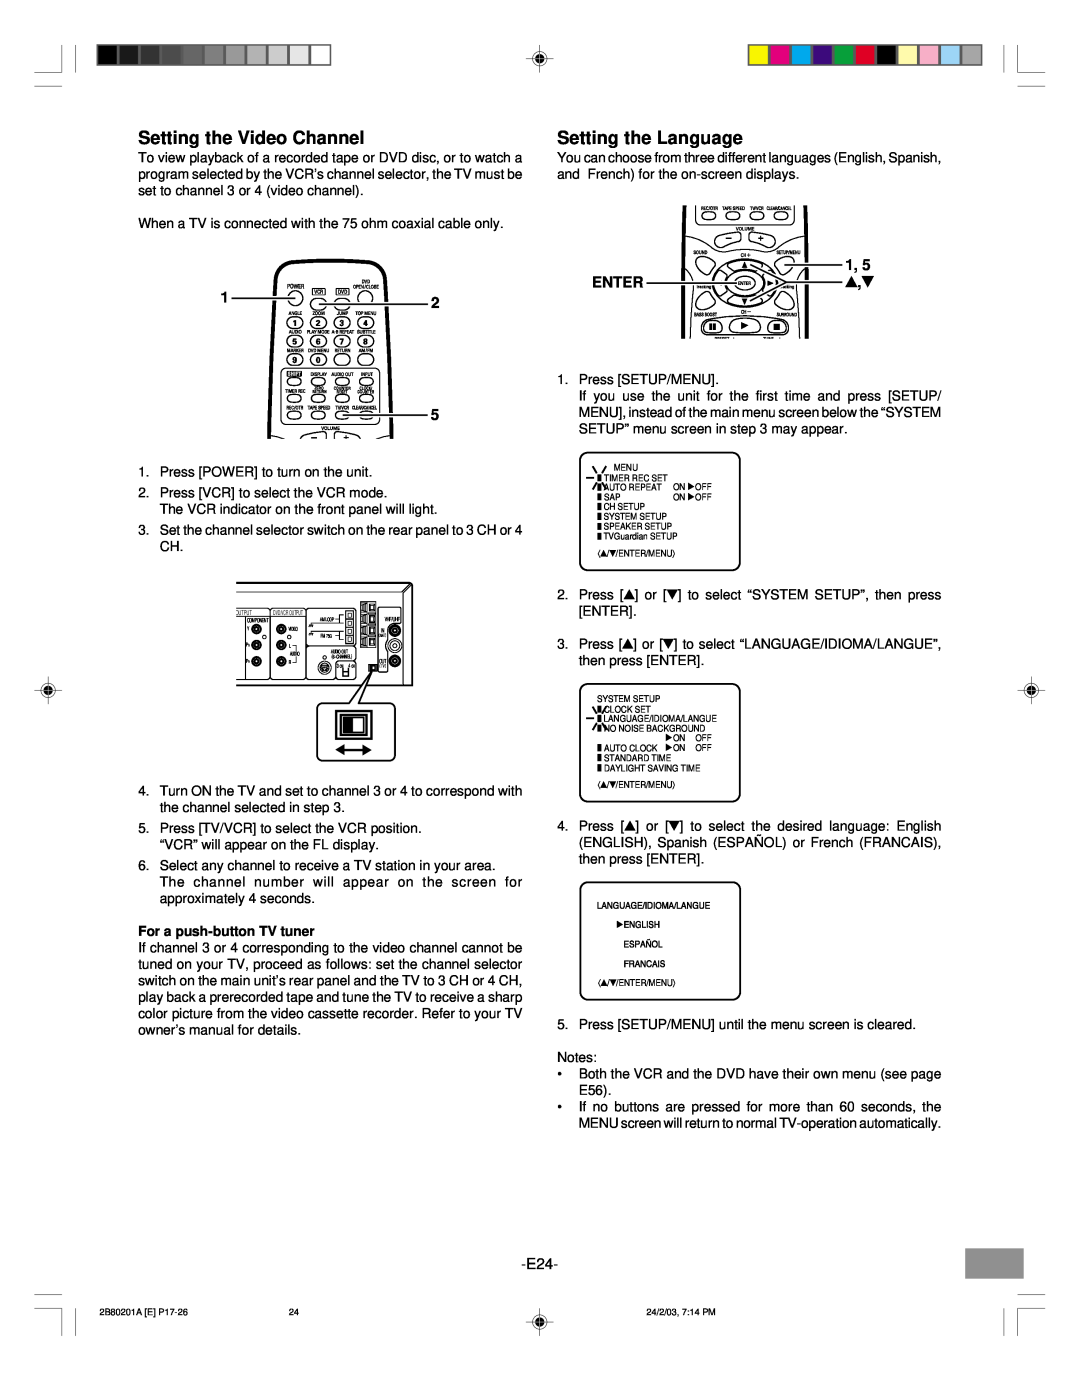 Sanyo DWM-3500 instruction manual Setting the Video Channel, Setting the Language, Enter, For a push-buttonTV tuner 